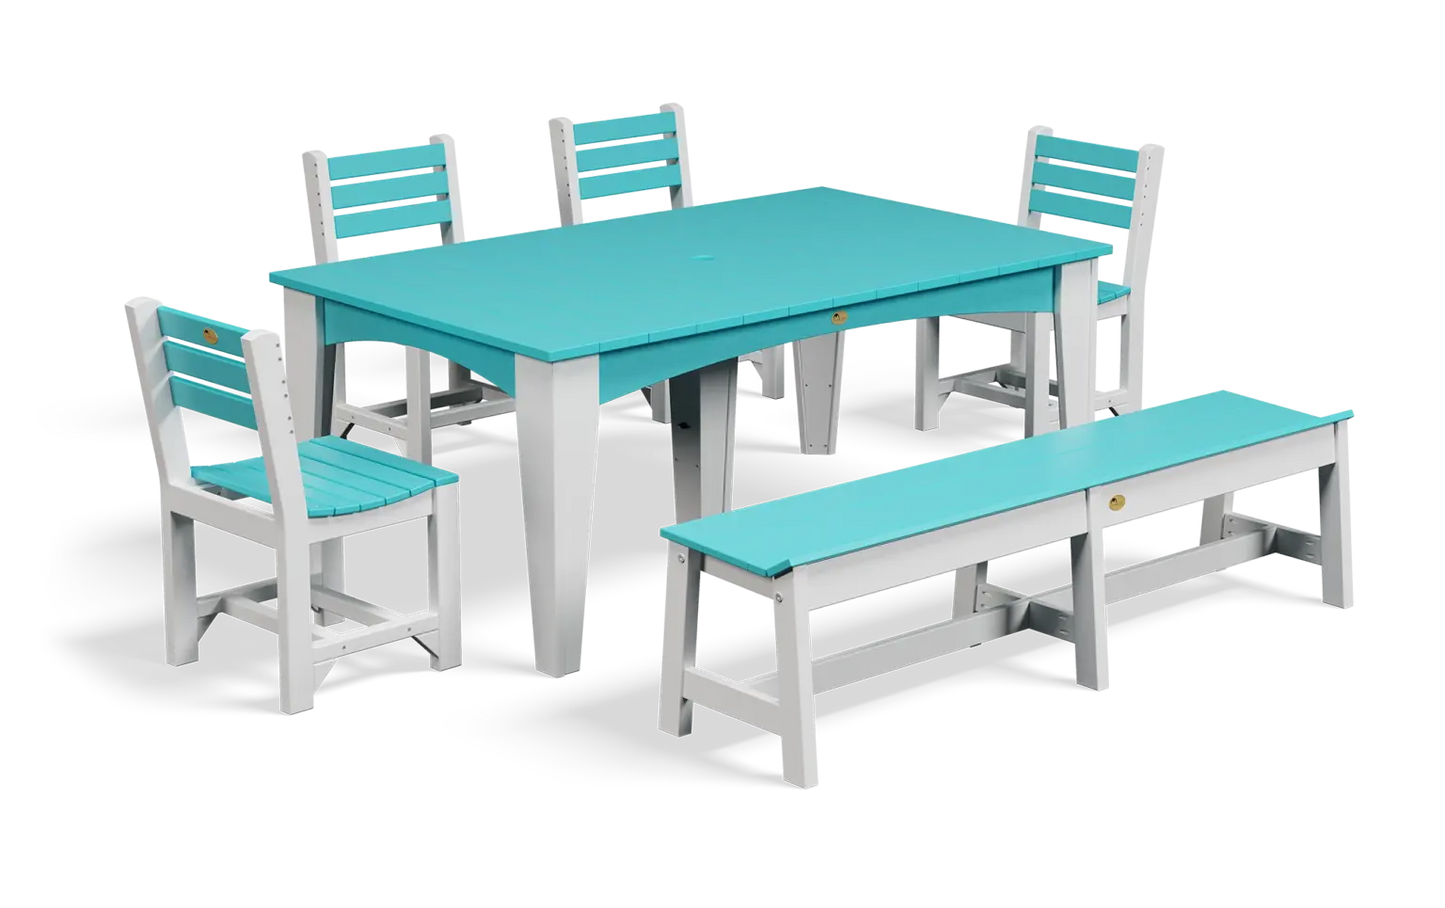 LuxCraft Recycled Plastic 44" x 72" Rectangular Island Dining Height Table - LEAD TIME TO SHIP 3 TO 4 WEEKS